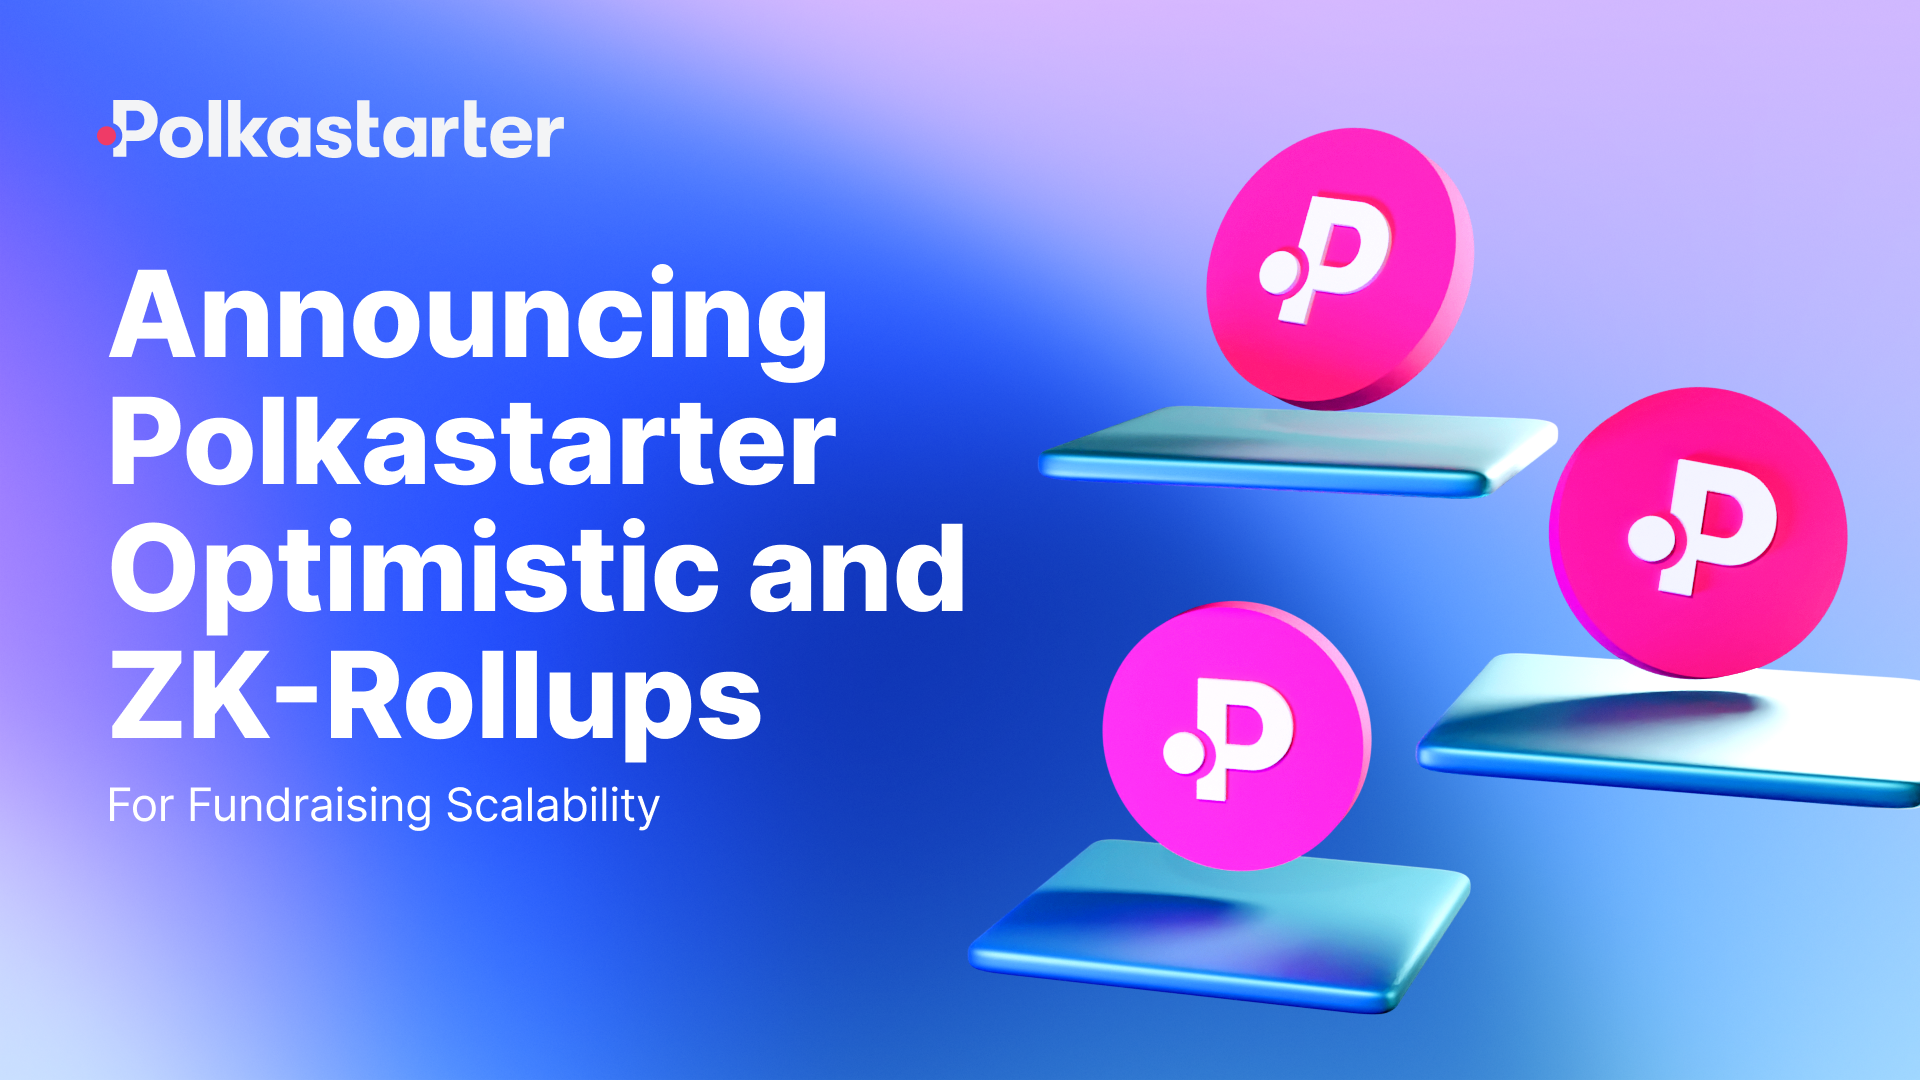 Announcing Polkastarter Optimistic and ZK-Rollups For Fundraising Scalability